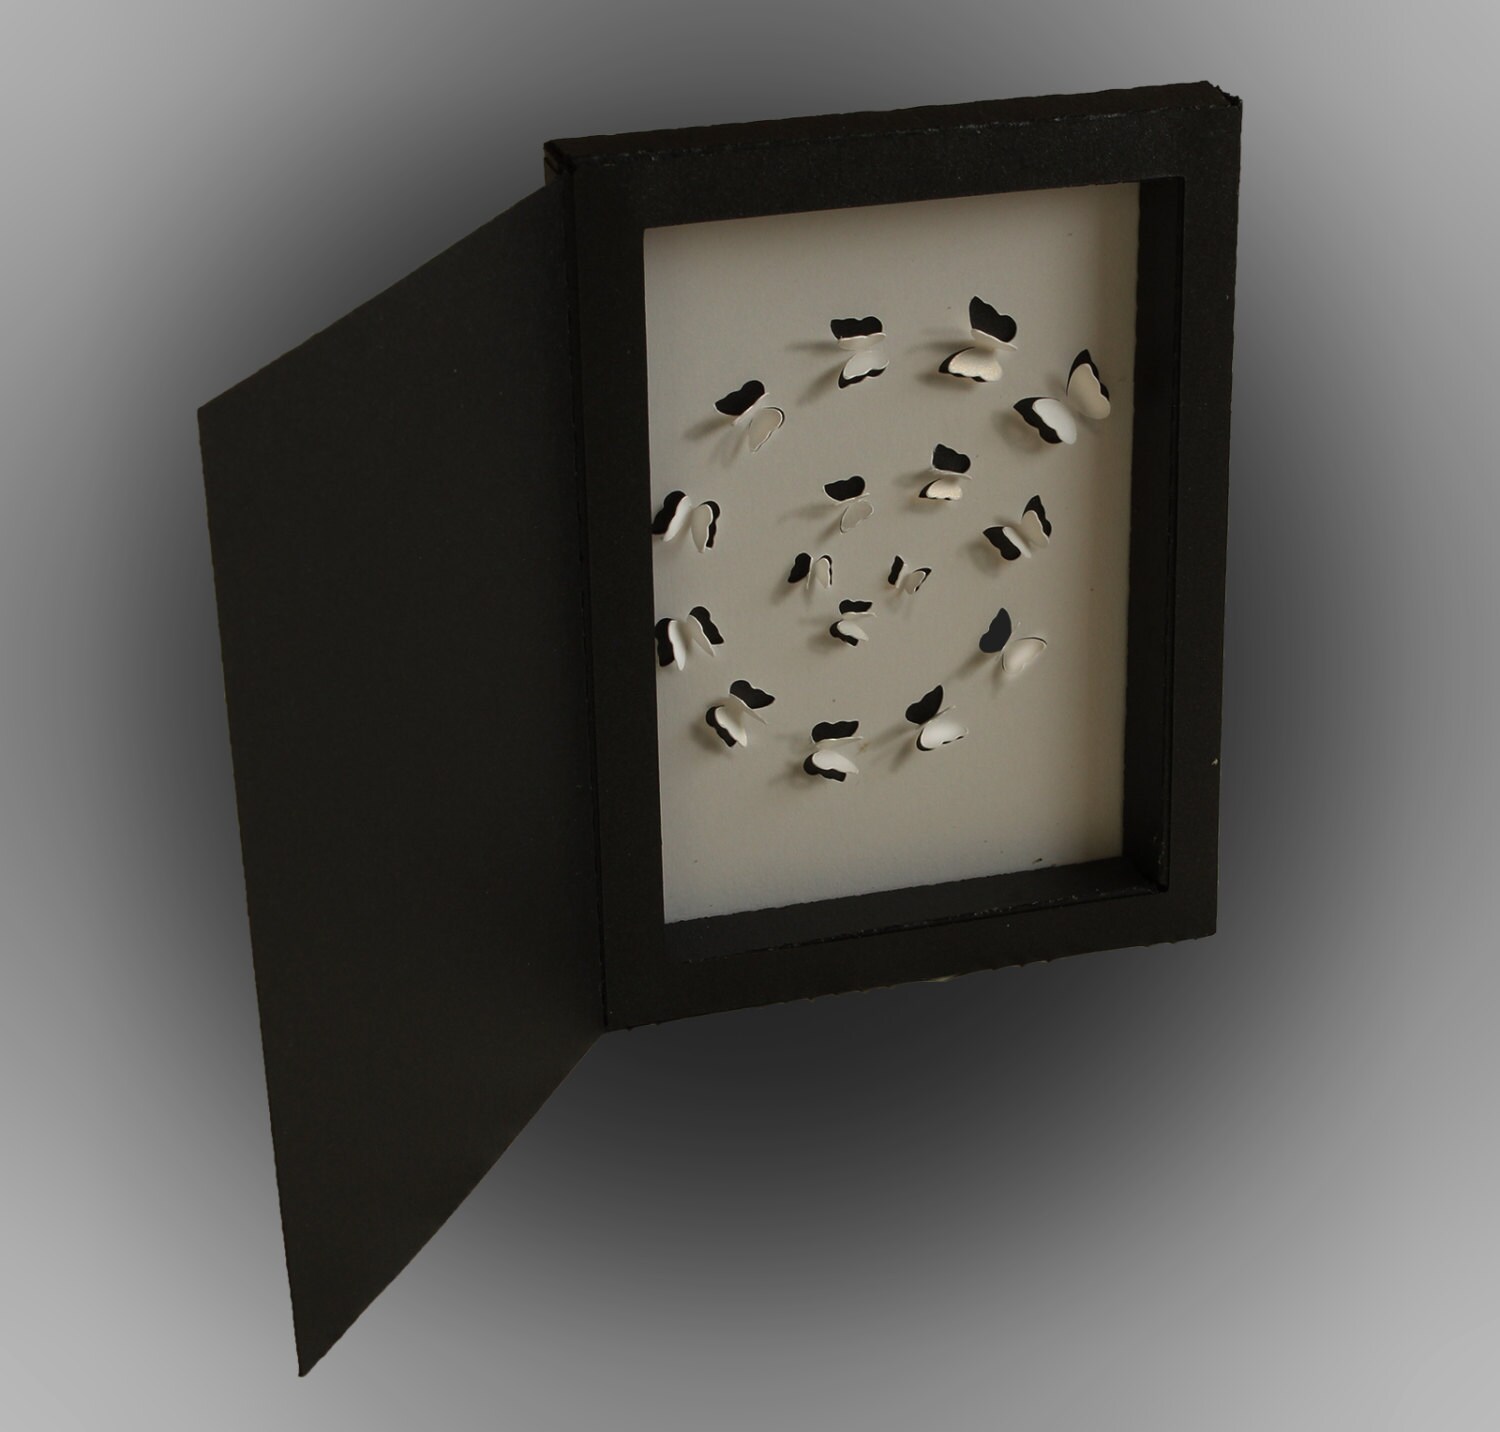 Download 3D SVG Shadow Box greetig card with Butterfly detail. DIGITAL